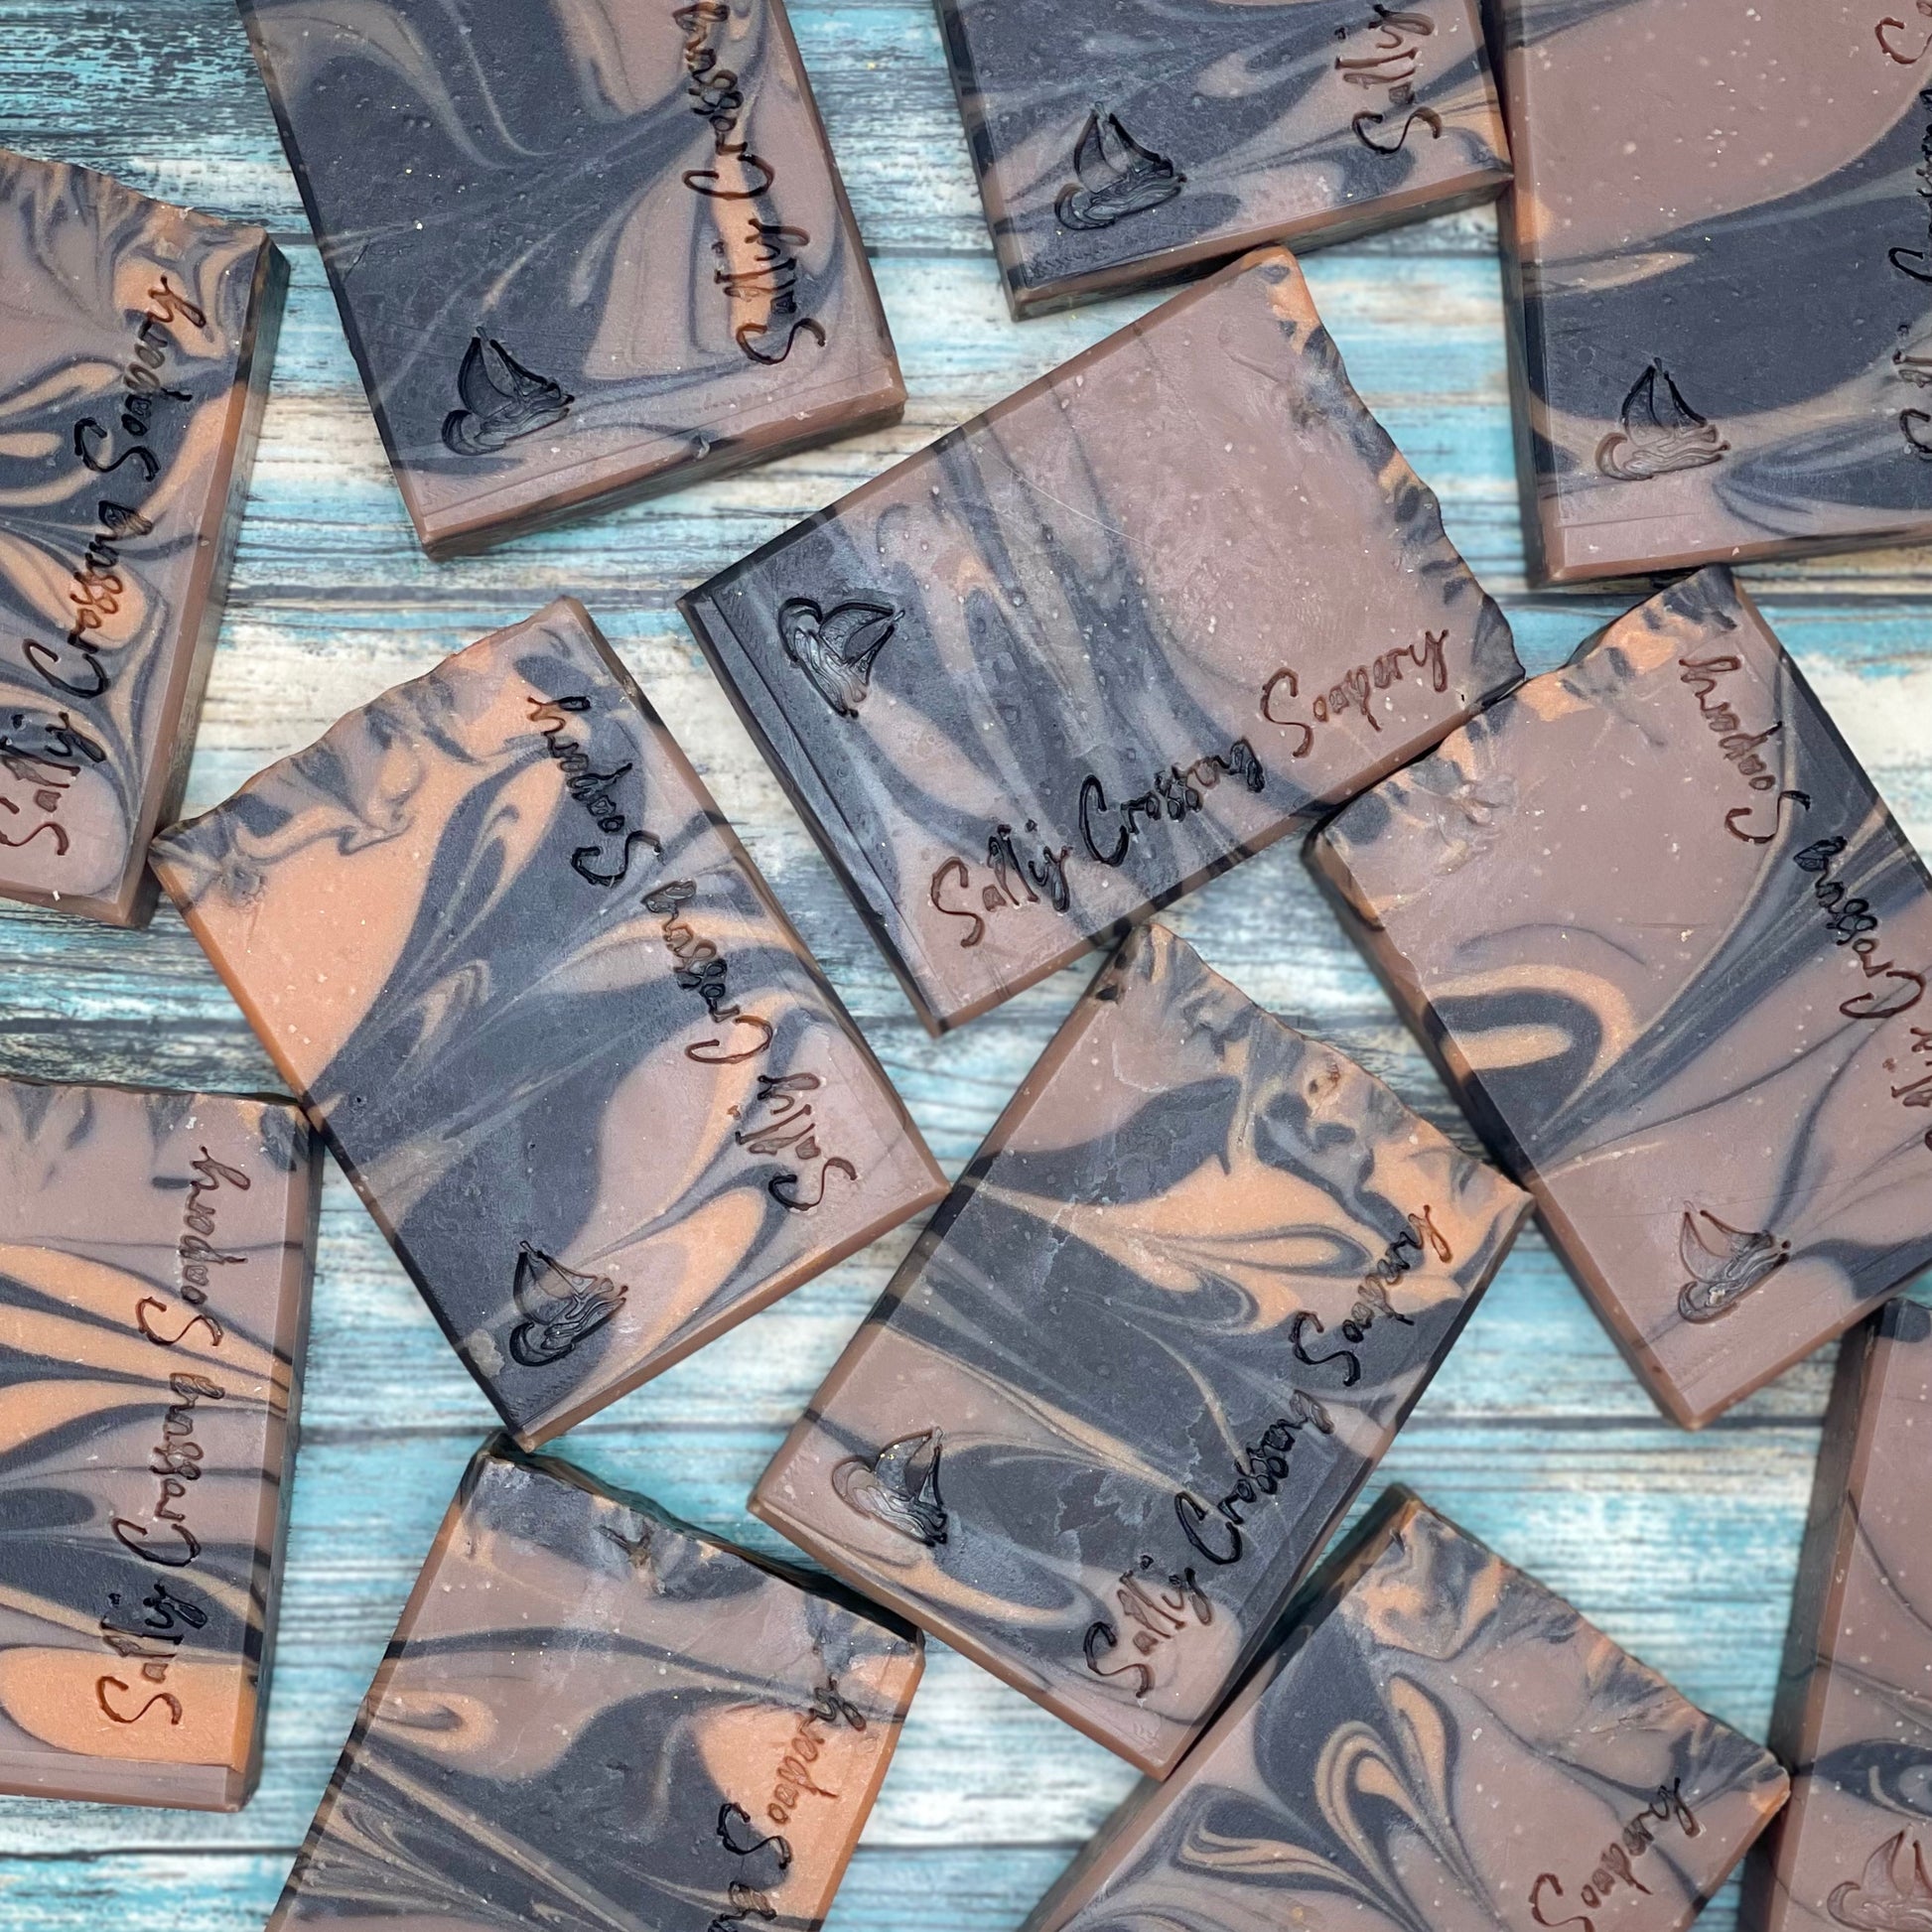 Arrangement of soap bars. Each bar is swirled with the colors-deepest brown, medium brown, and caramel- and hand stamped with a small sailboat graphic and salty crossing Soapery text